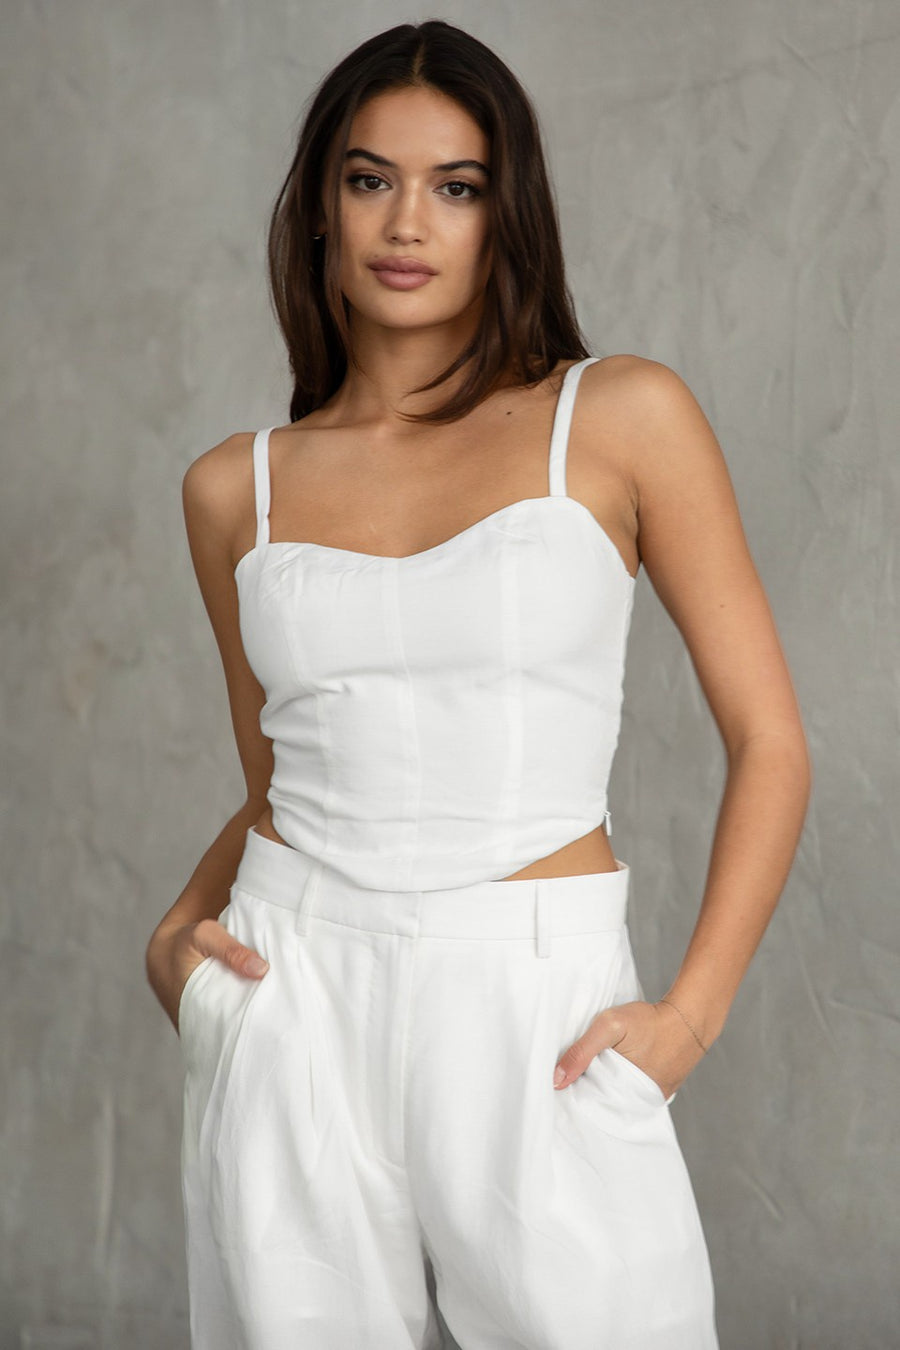 Featuring a cropped fitted tank with a side zipper in the color white 